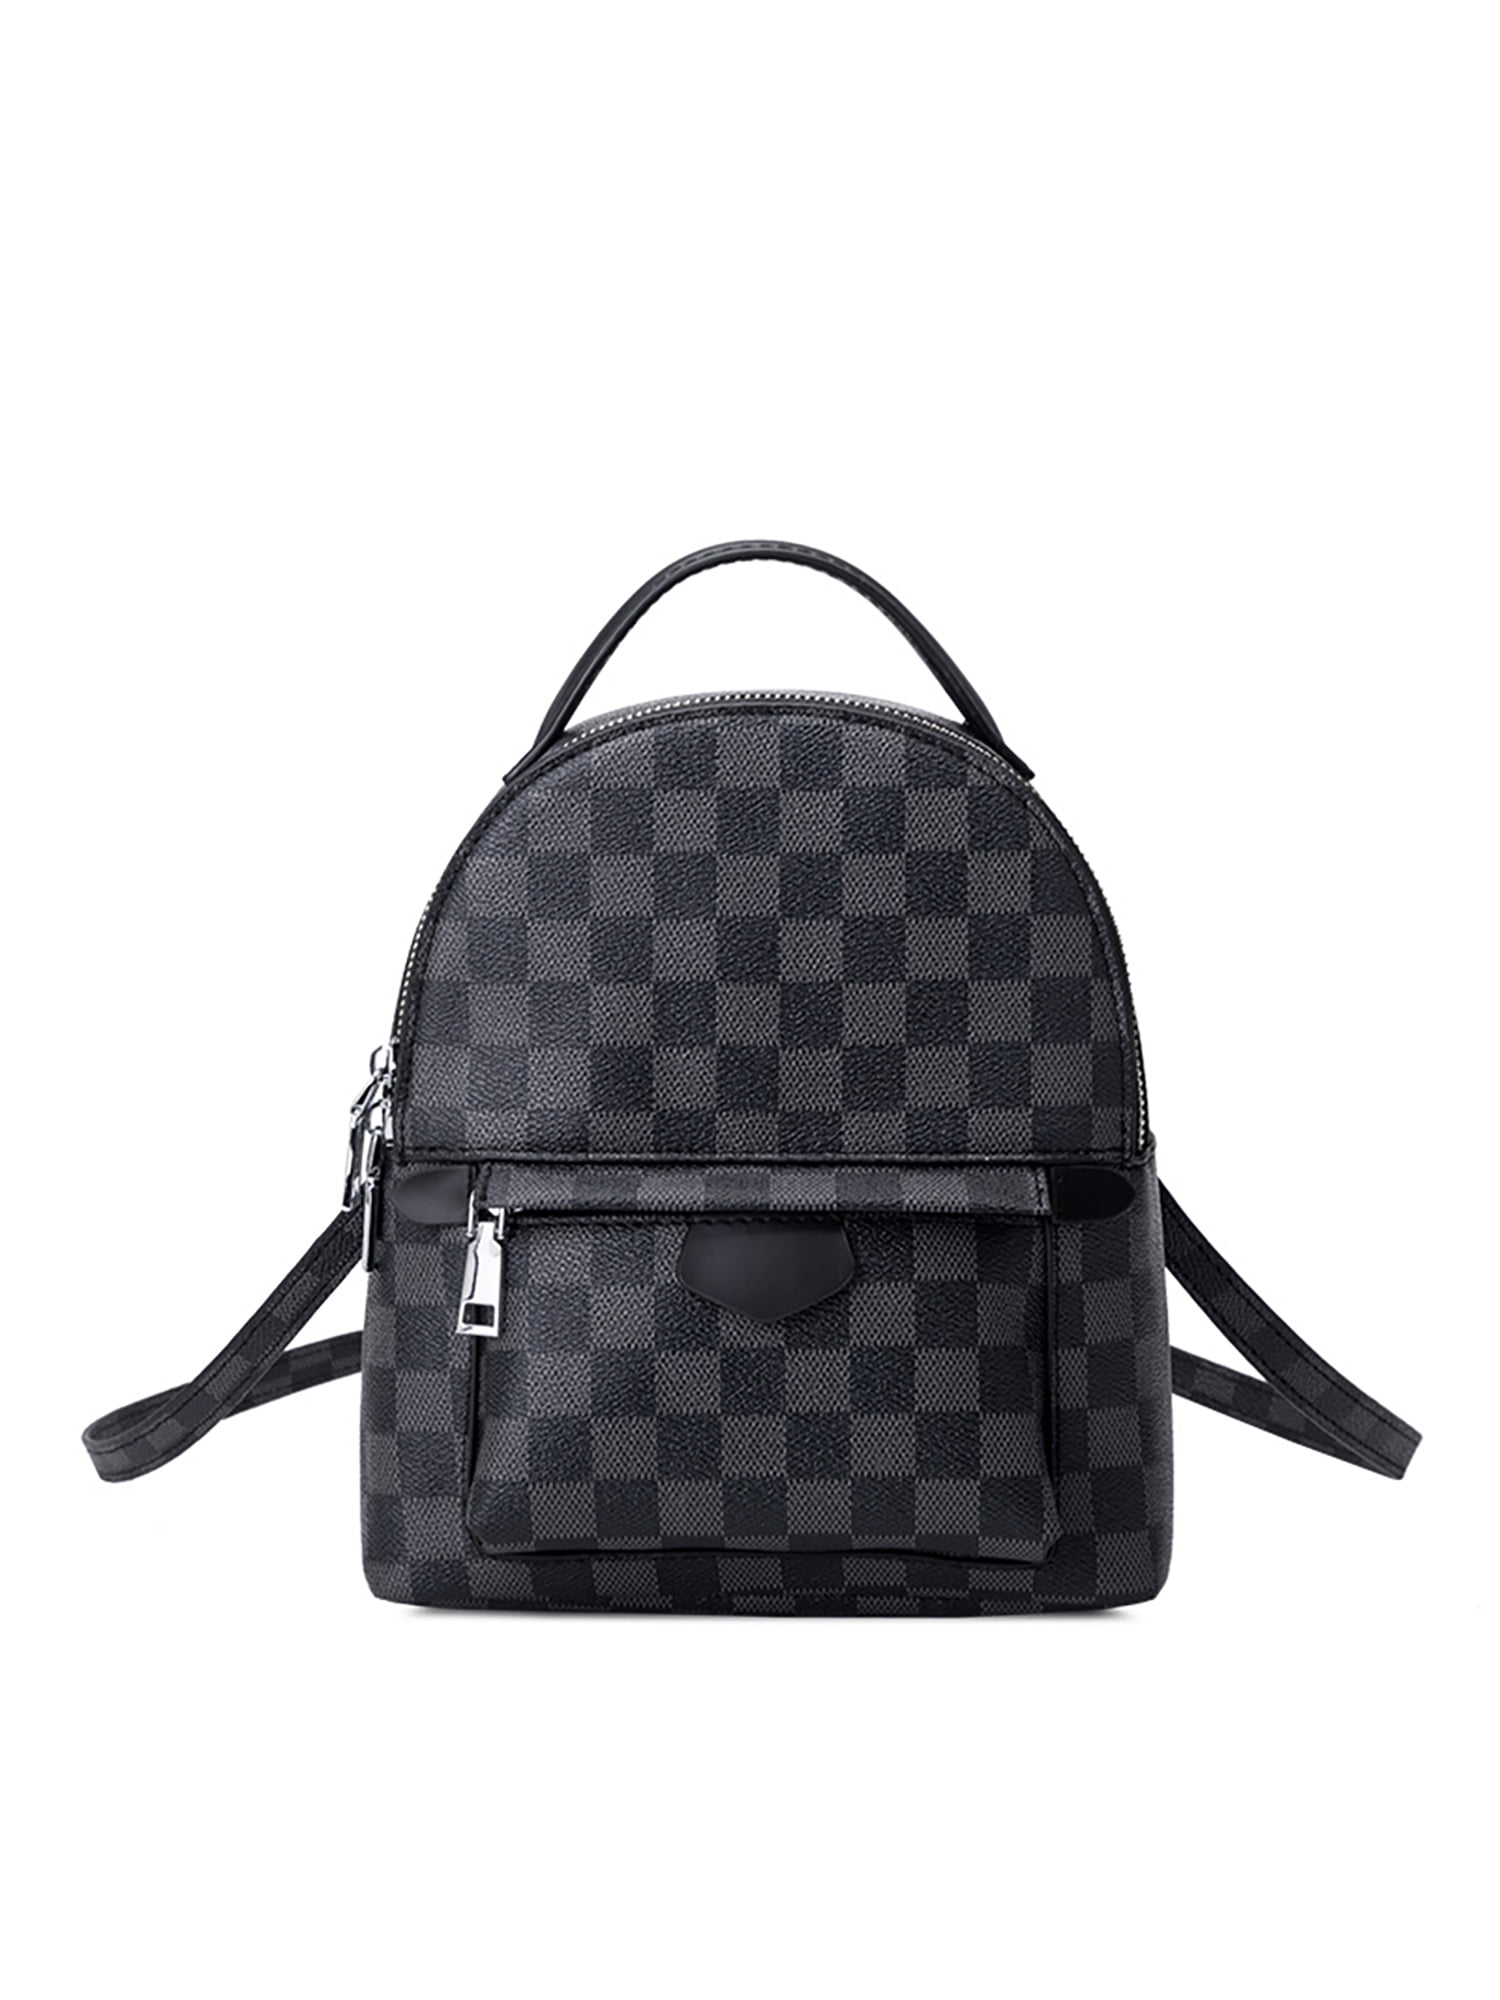 Sexy Dance Checkered Tote Shoulder Handbags Bag with inner pouch